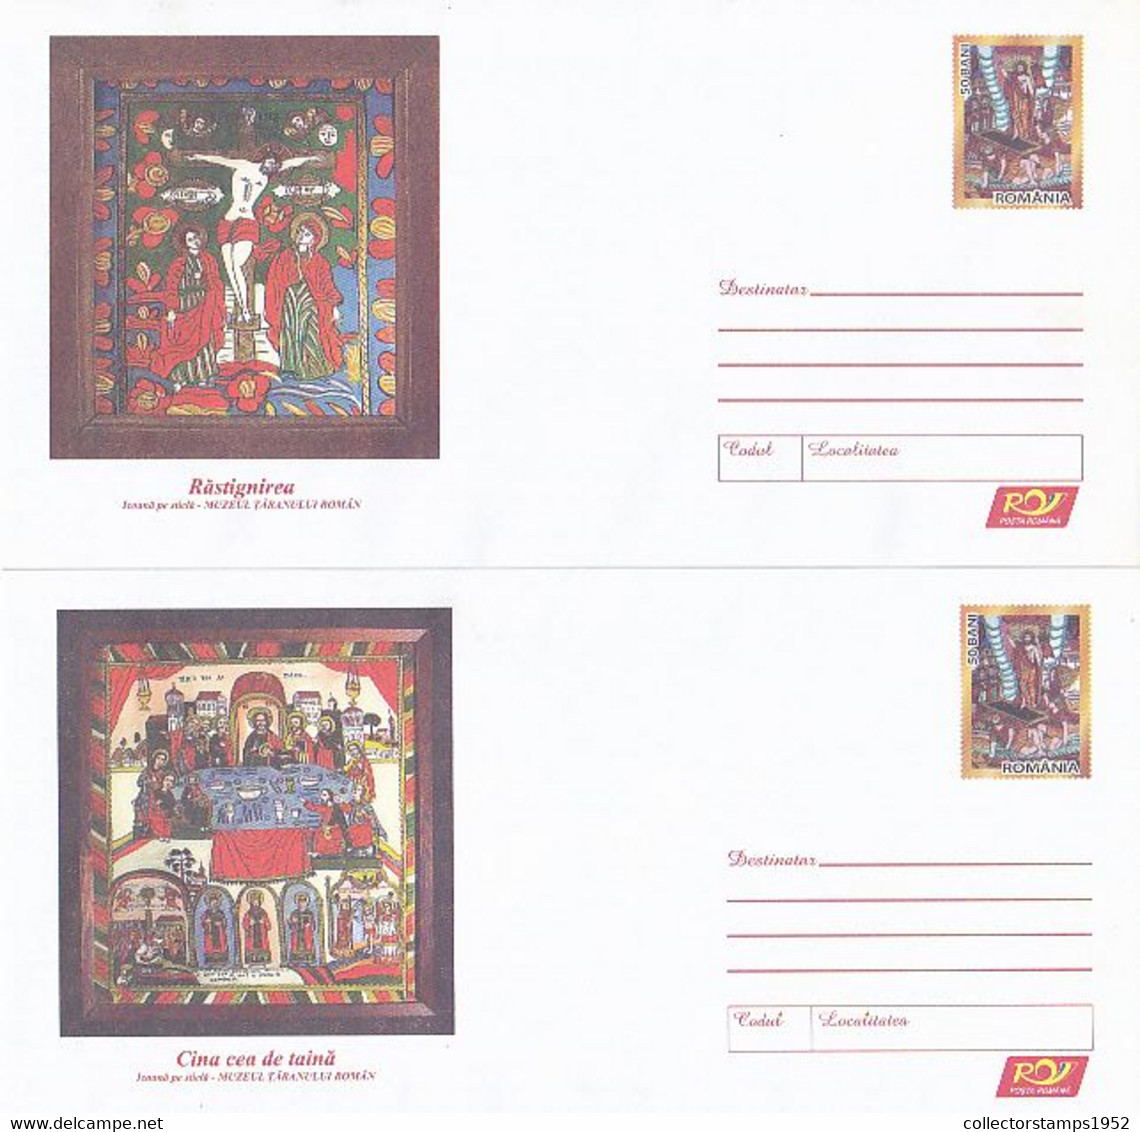 9030FM- JESUS' CRUCIFIXION, LAST SUPPER ICONS, PAINTINGS, RELIGION, COVER STATIONERY, 2X, 2006, ROMANIA - Paintings